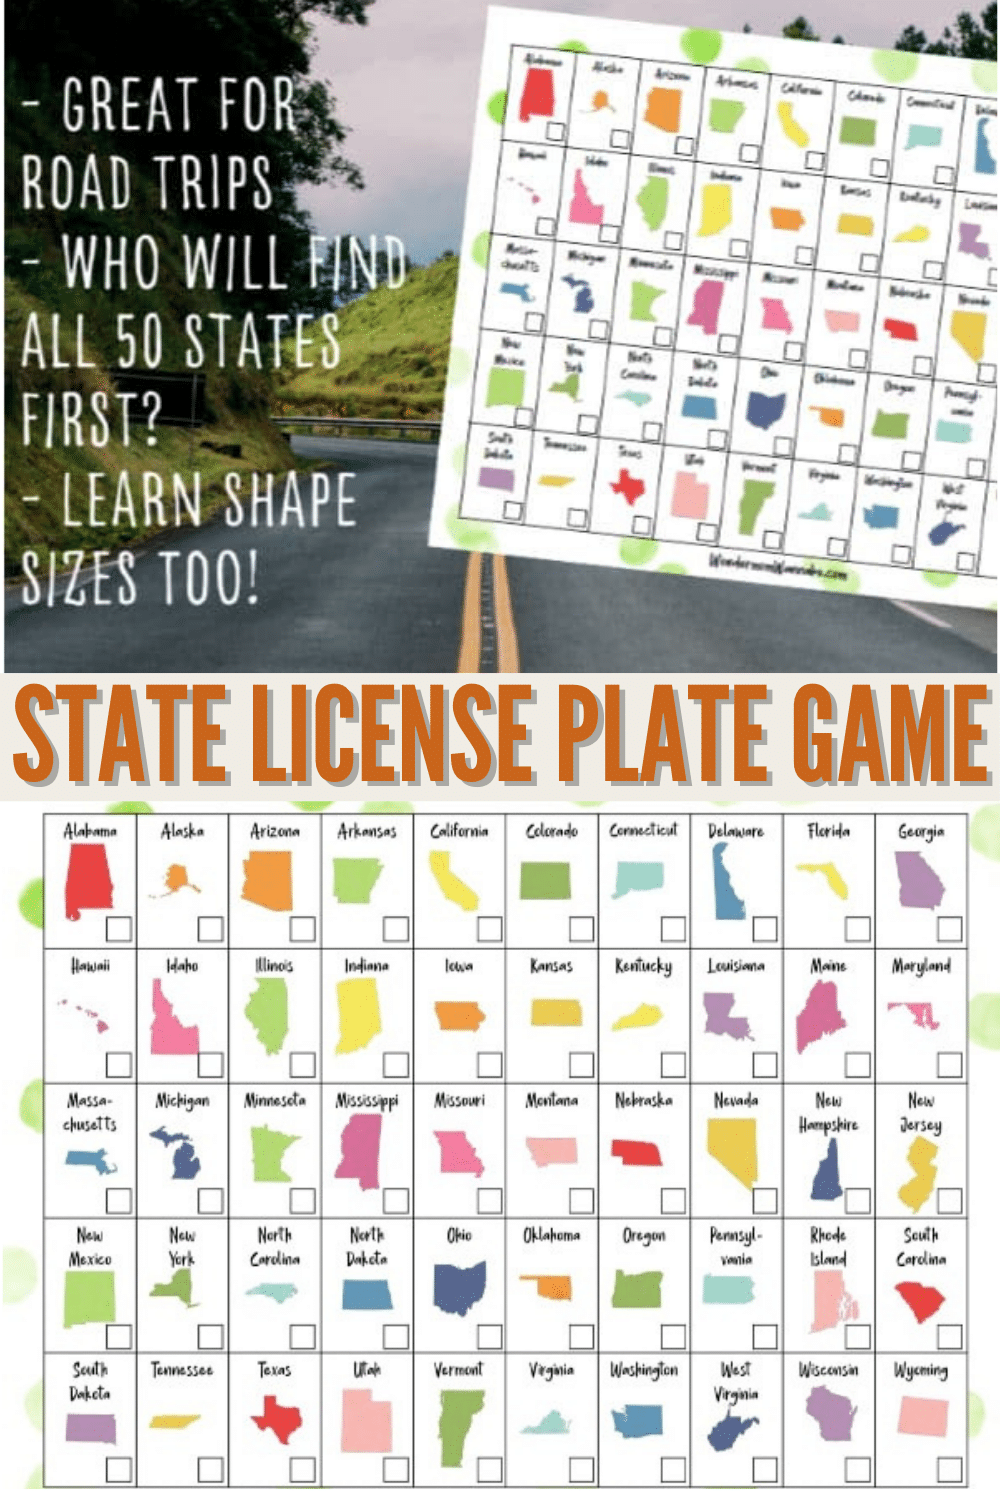 This printable state license plate game is the perfect way to keep kids occupied on long car rides. A fun educational travel game the whole family can play. #printables #travelgames #activitiesforkids via @wondermomwannab